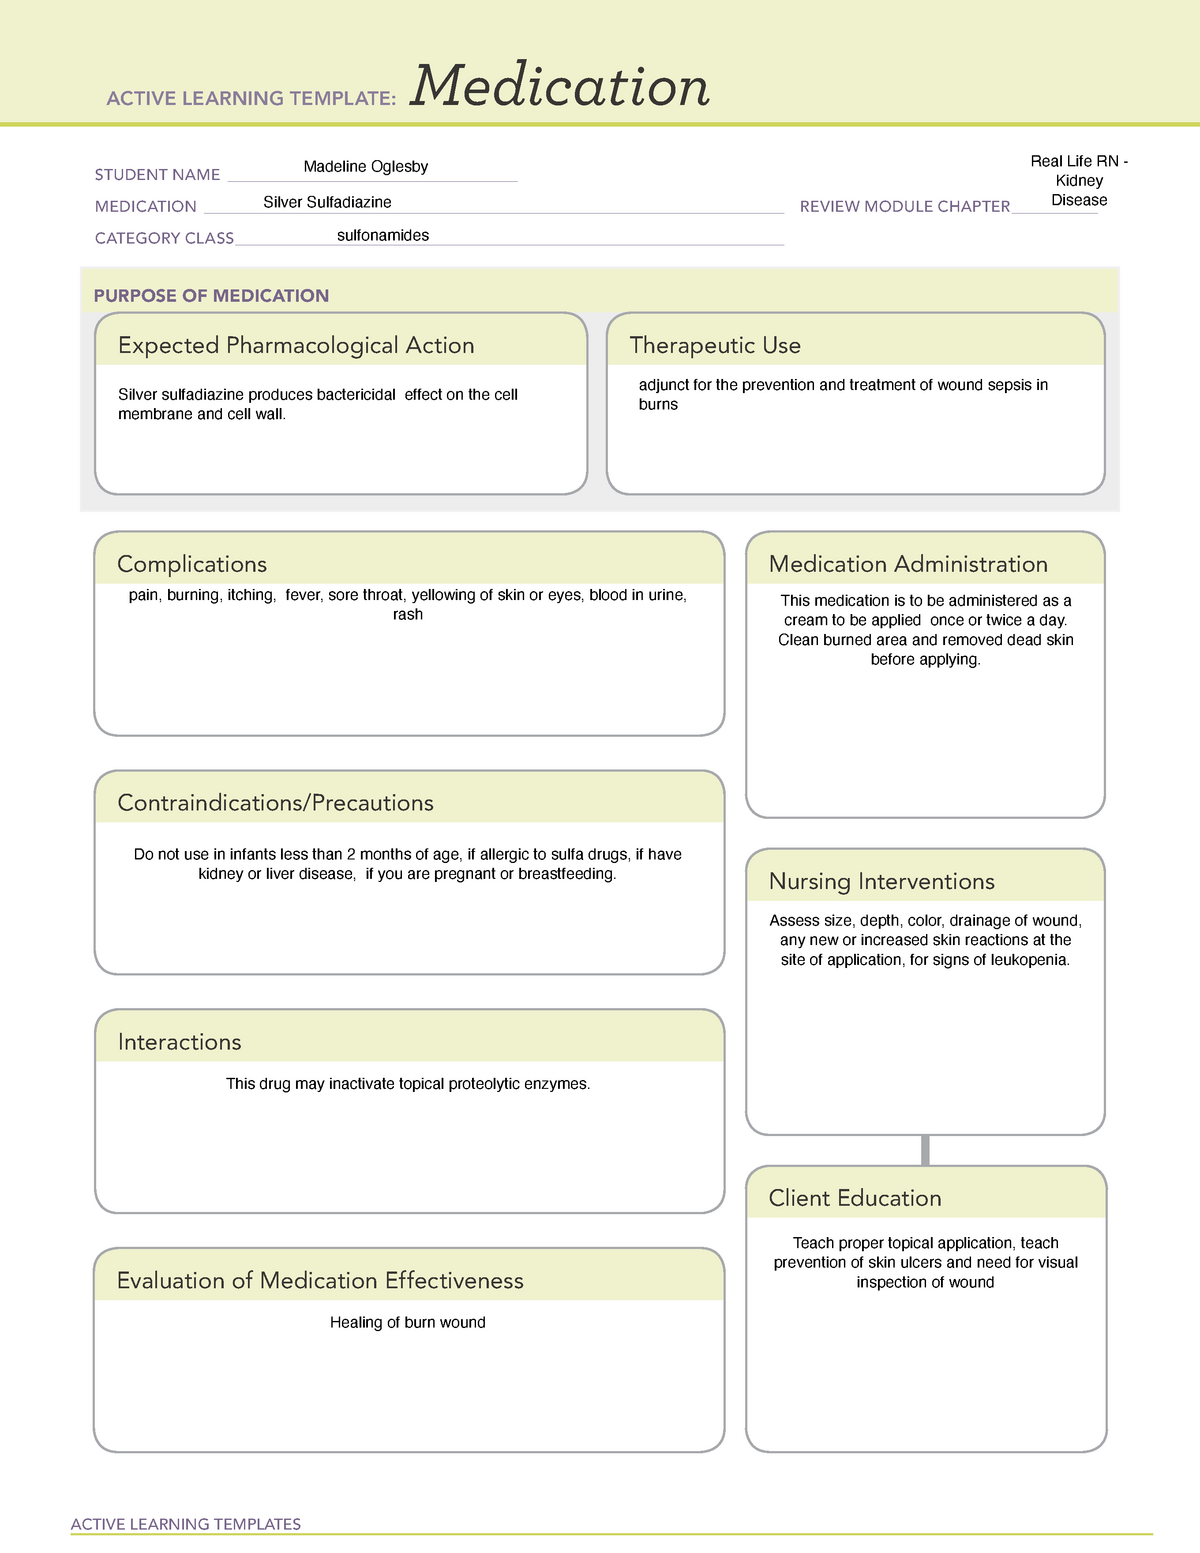 Medication silver sulfadiazine ACTIVE LEARNING TEMPLATES Medication